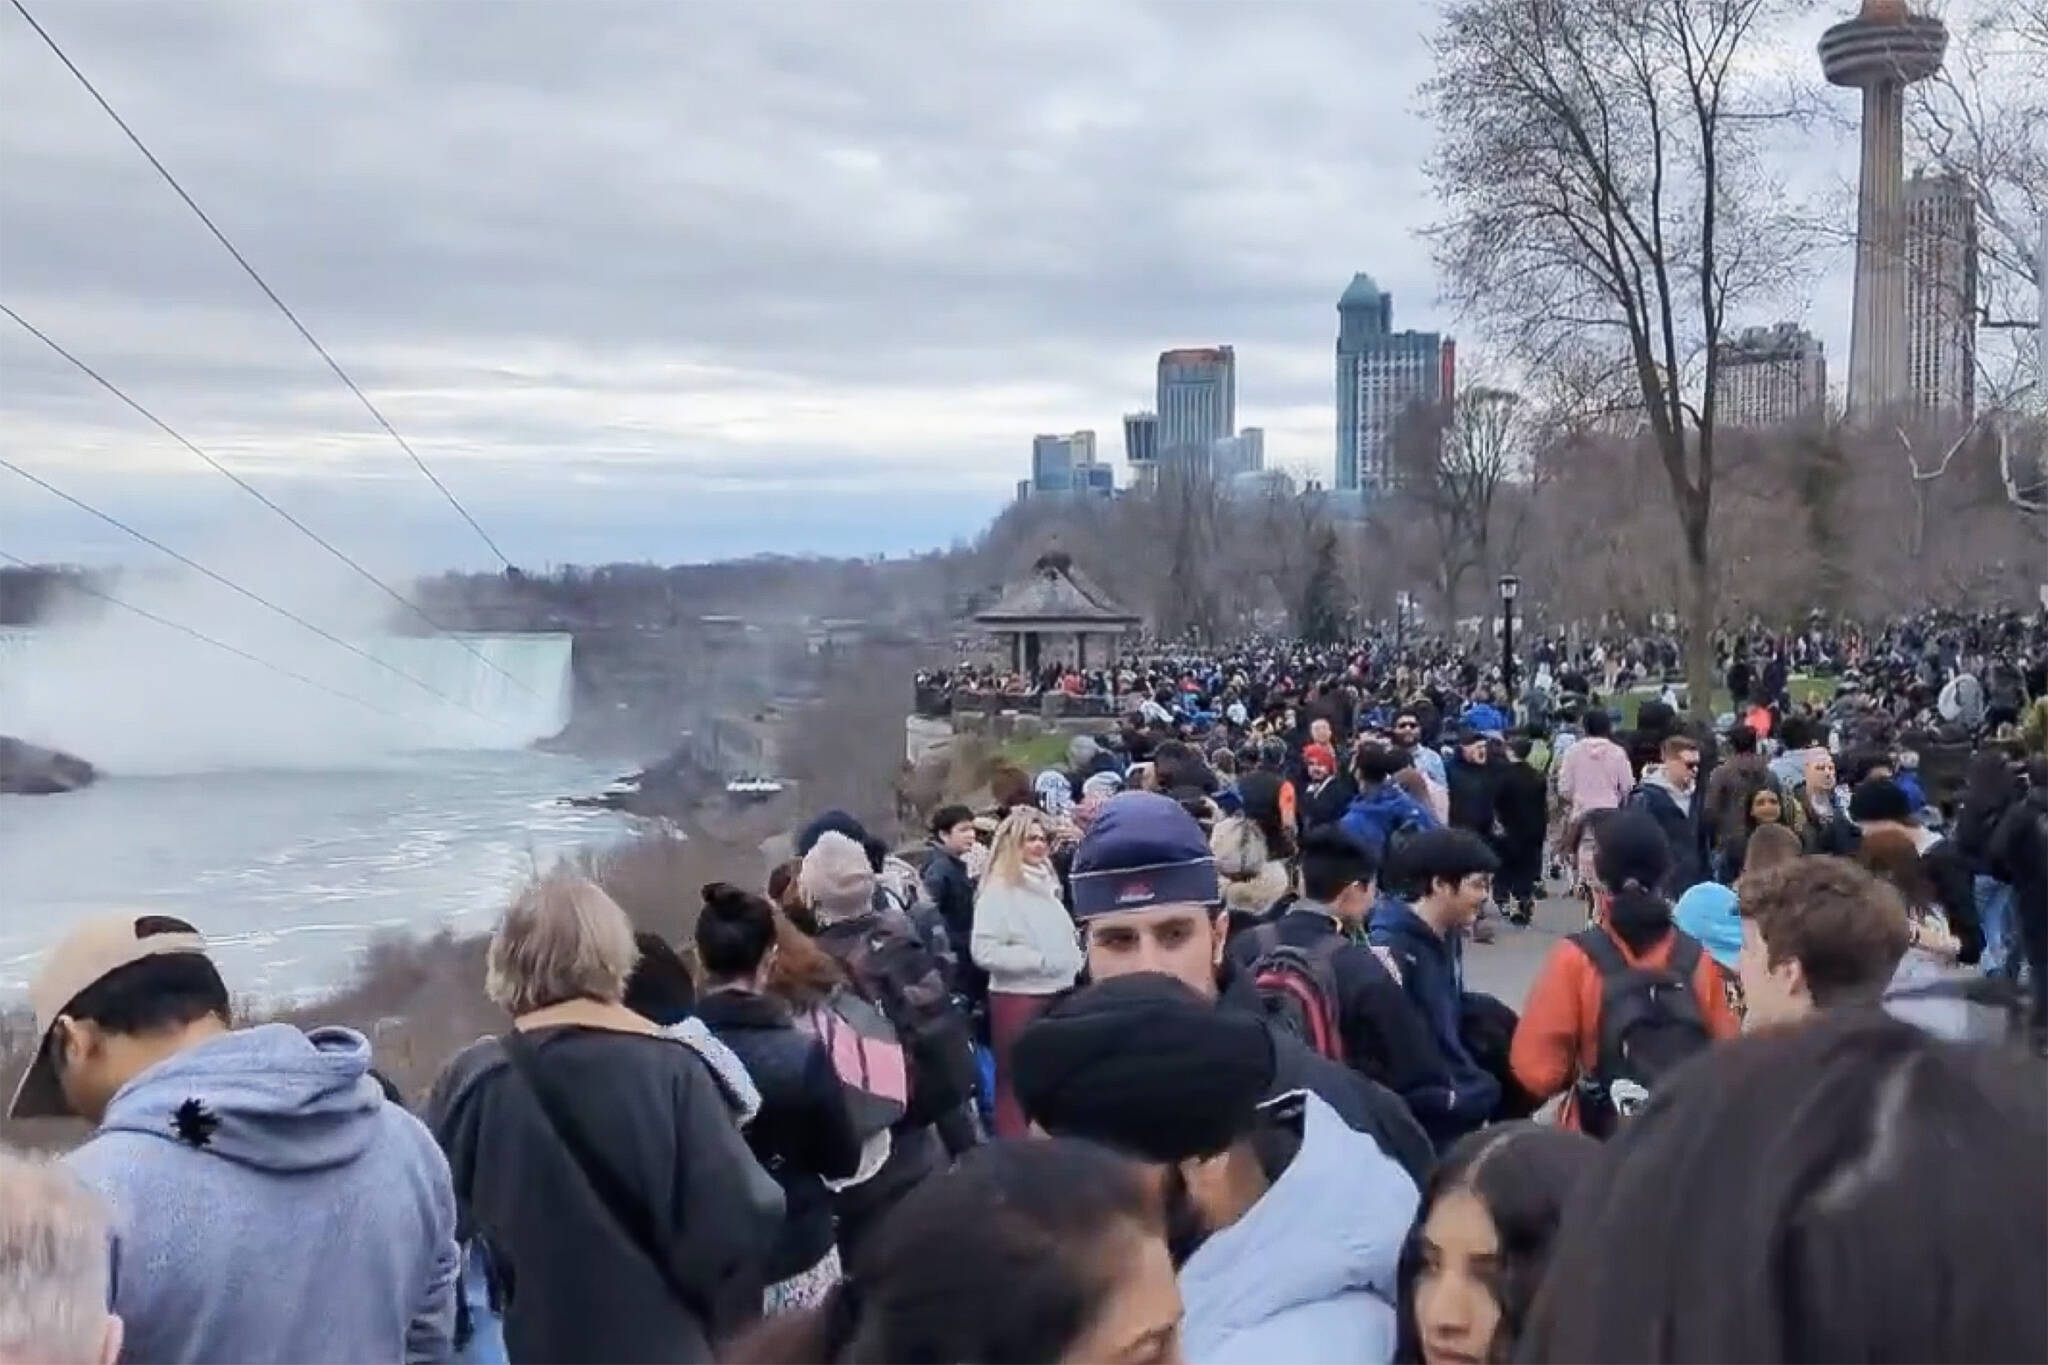 Solar eclipse in Niagara Falls kind of a bust due to overcast weather